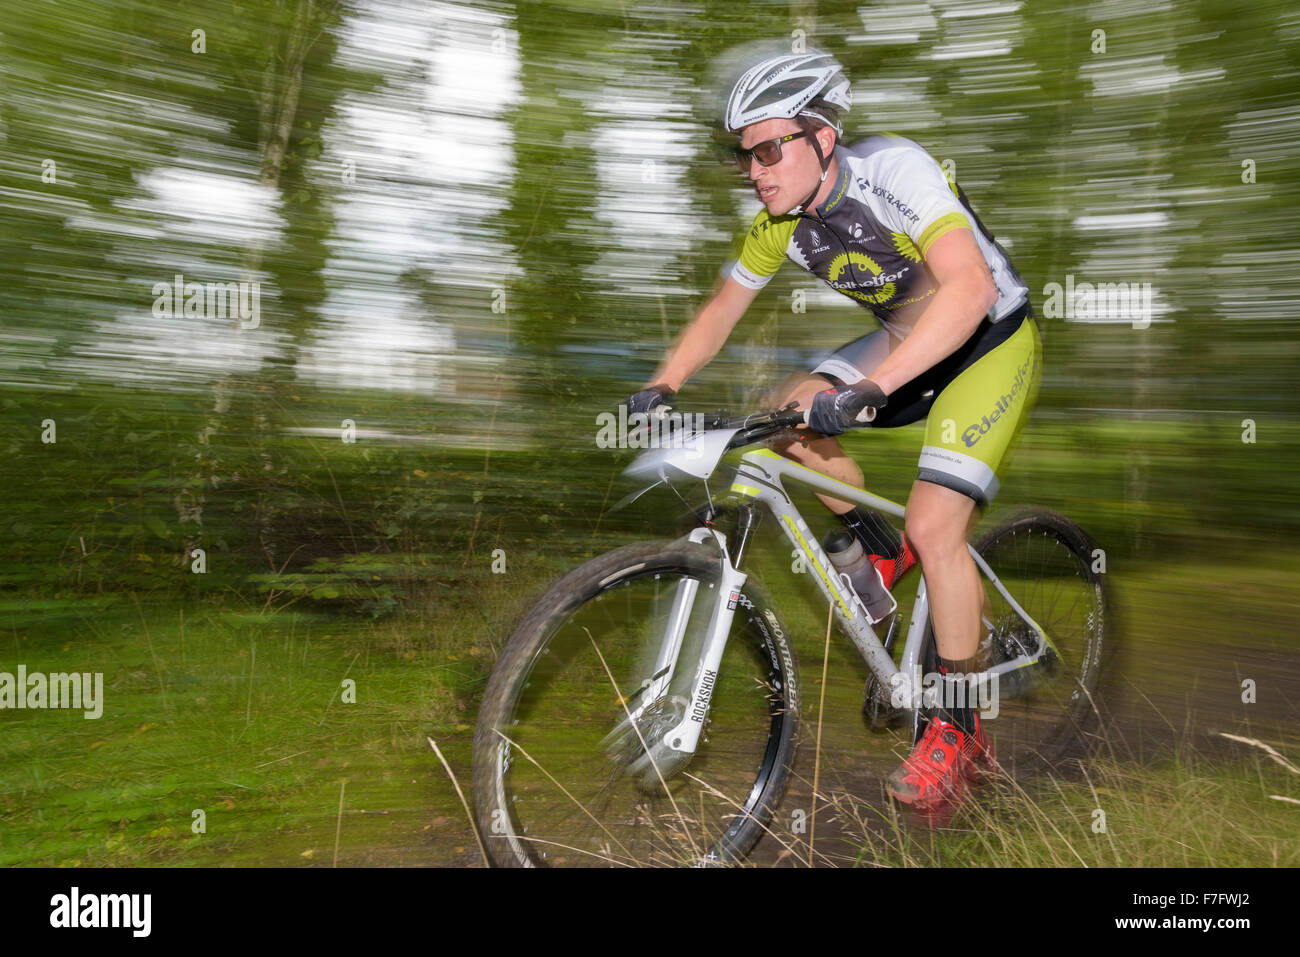 A mountain biker rides through a forest at a mountain biking competition Stock Photo